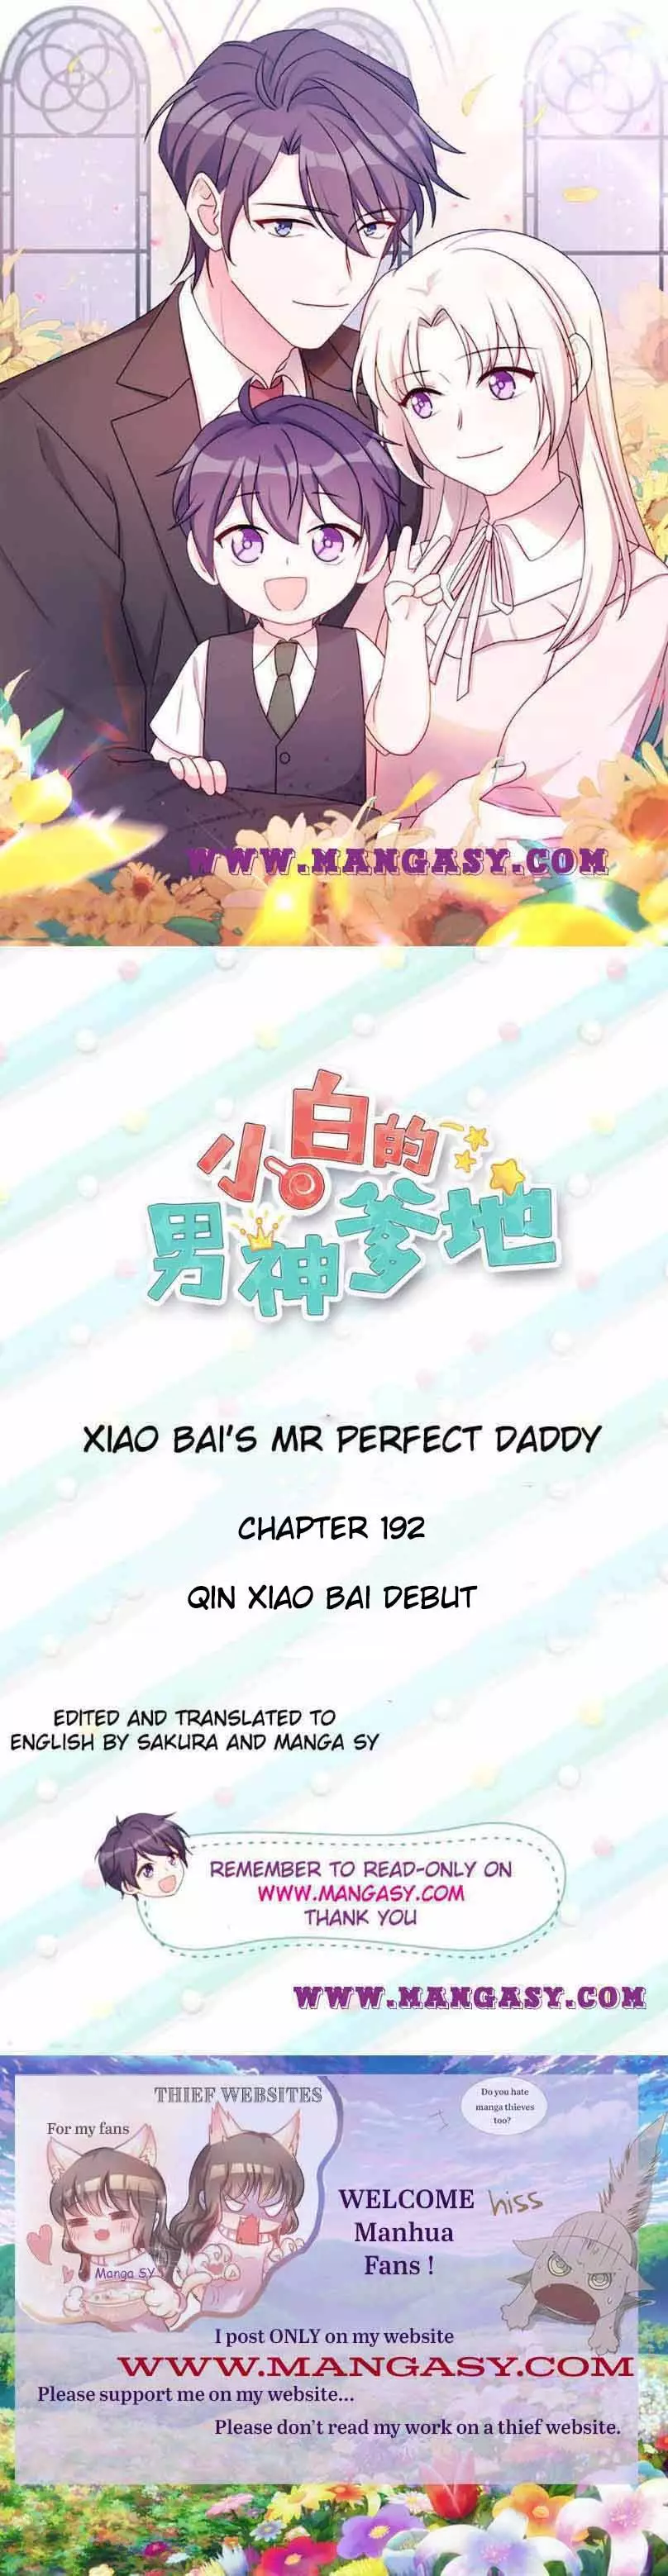 Xiao Bai’S Father Is A Wonderful Person - 192 page 1-c4098e64